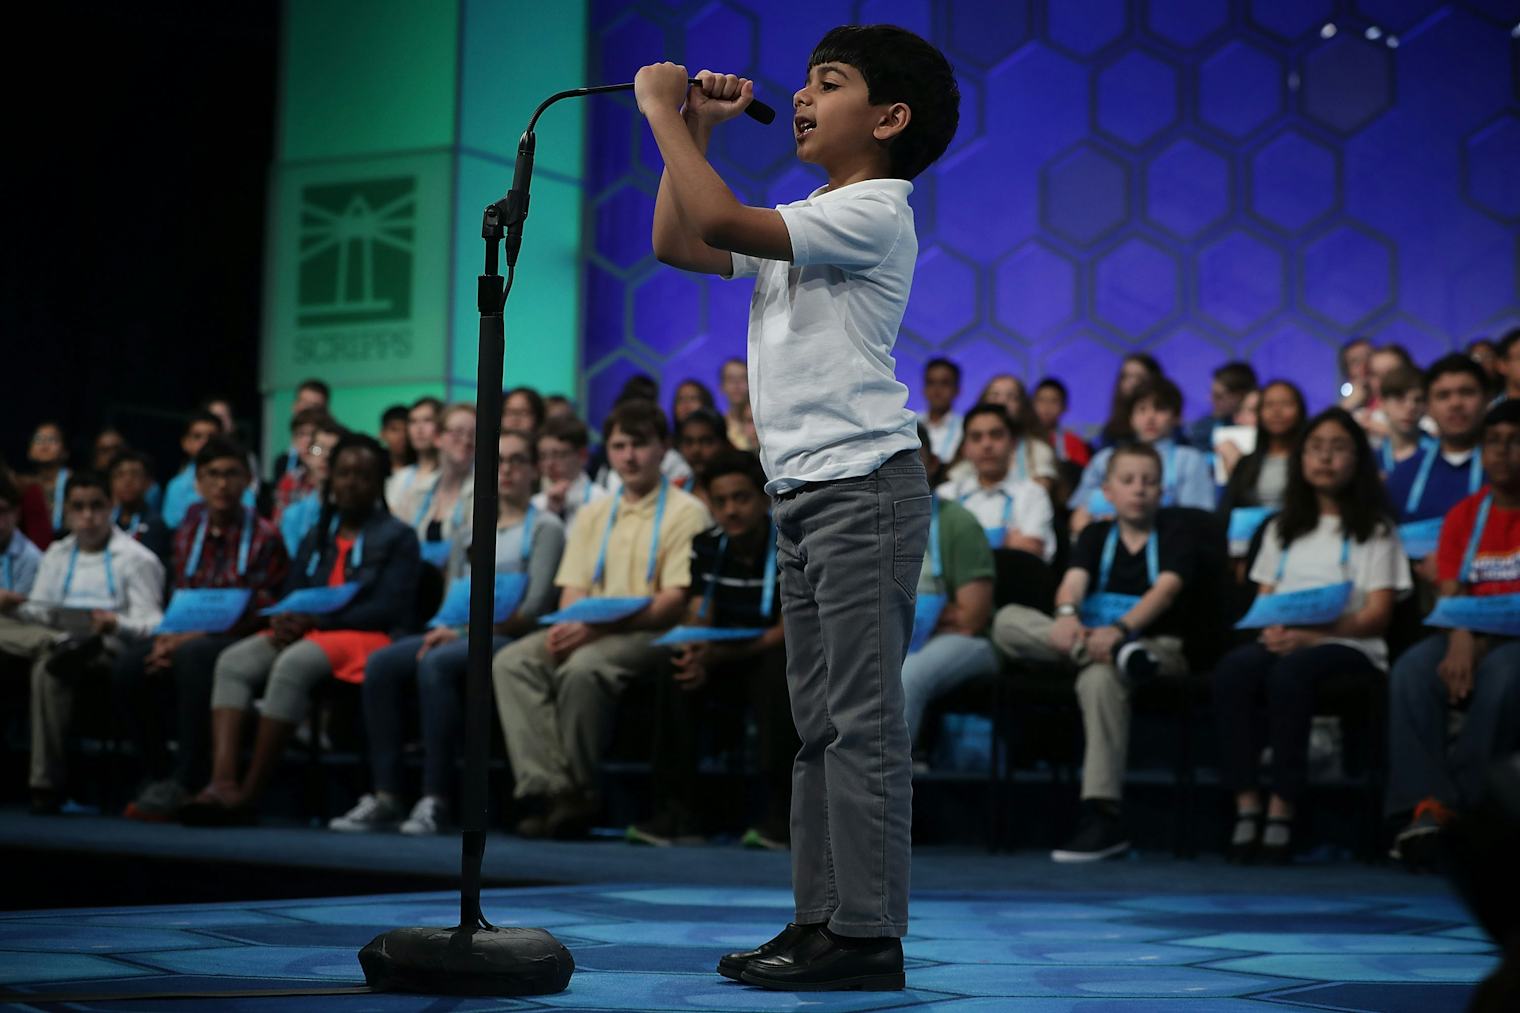 How Many Questions Can Scripps Spelling Bee Contestants Ask The Judges?